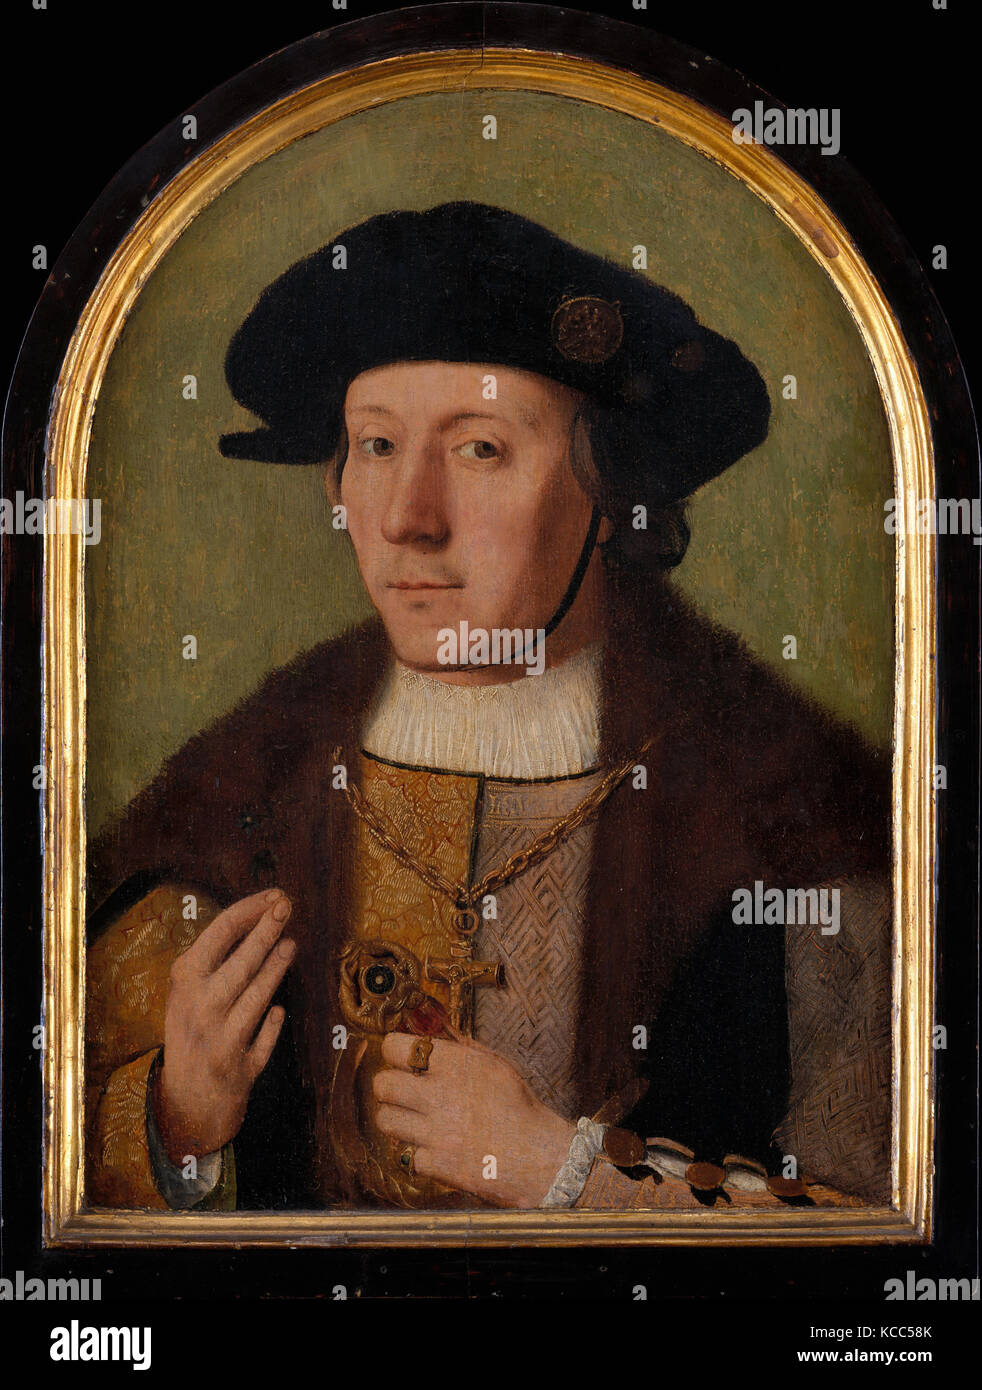 Portrait of a Man, Oil on wood, Overall, with arched top and engaged frame, 18 1/8 x 13 1/2 in. (46 x 34.3 cm); painted surface Stock Photo